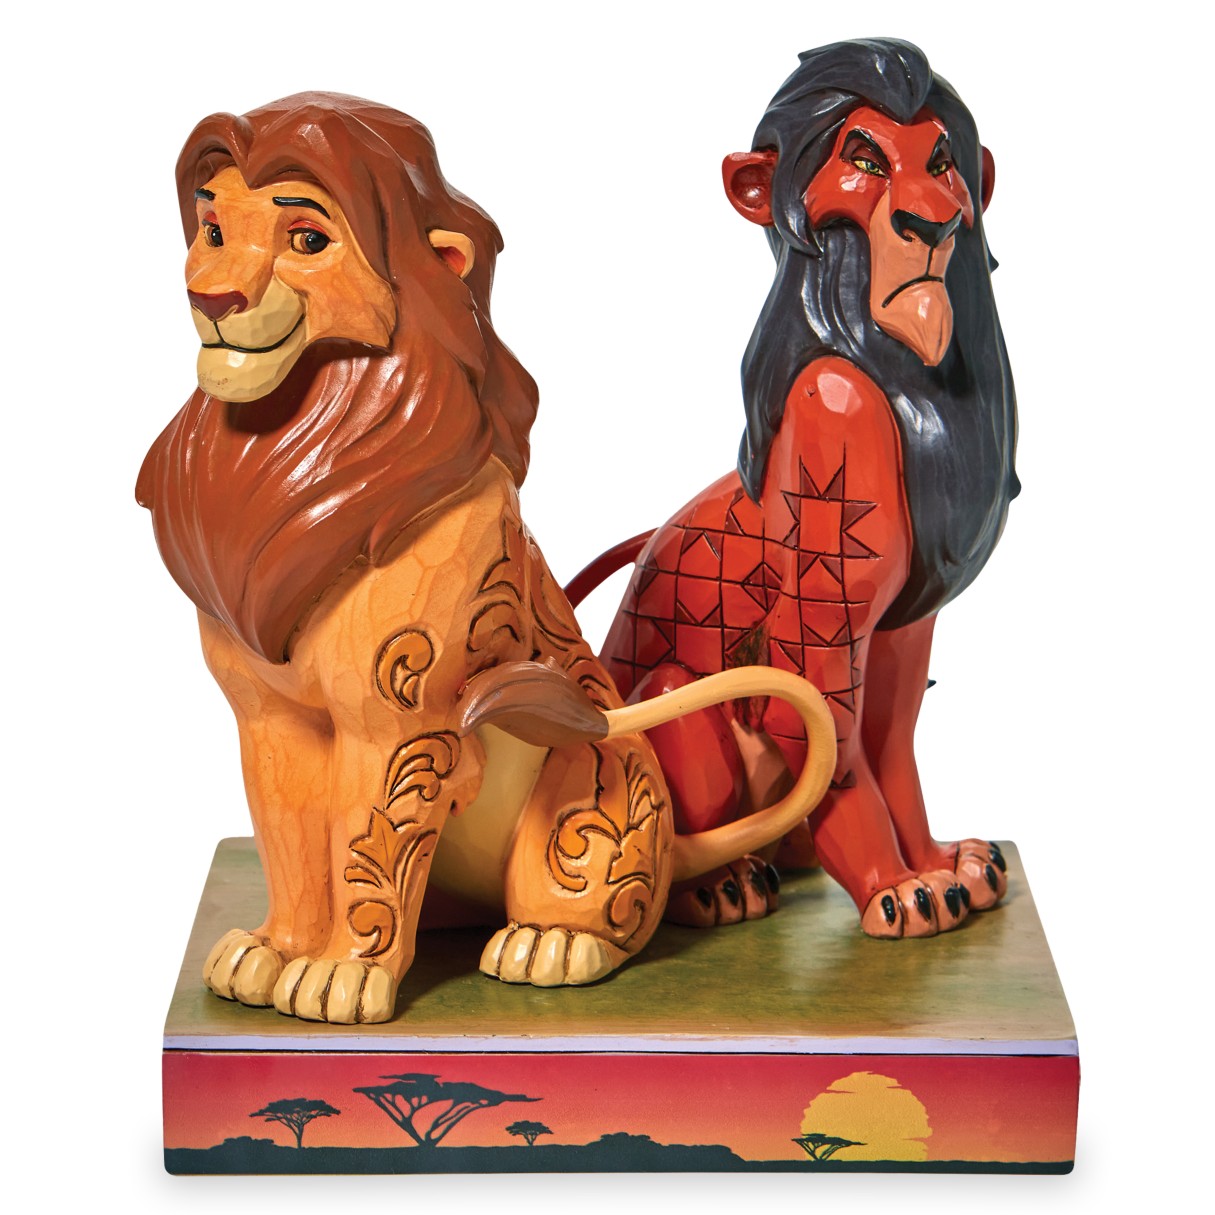 Simba and Scar ''Proud and Petulant'' Figure by Jim Shore – The Lion King